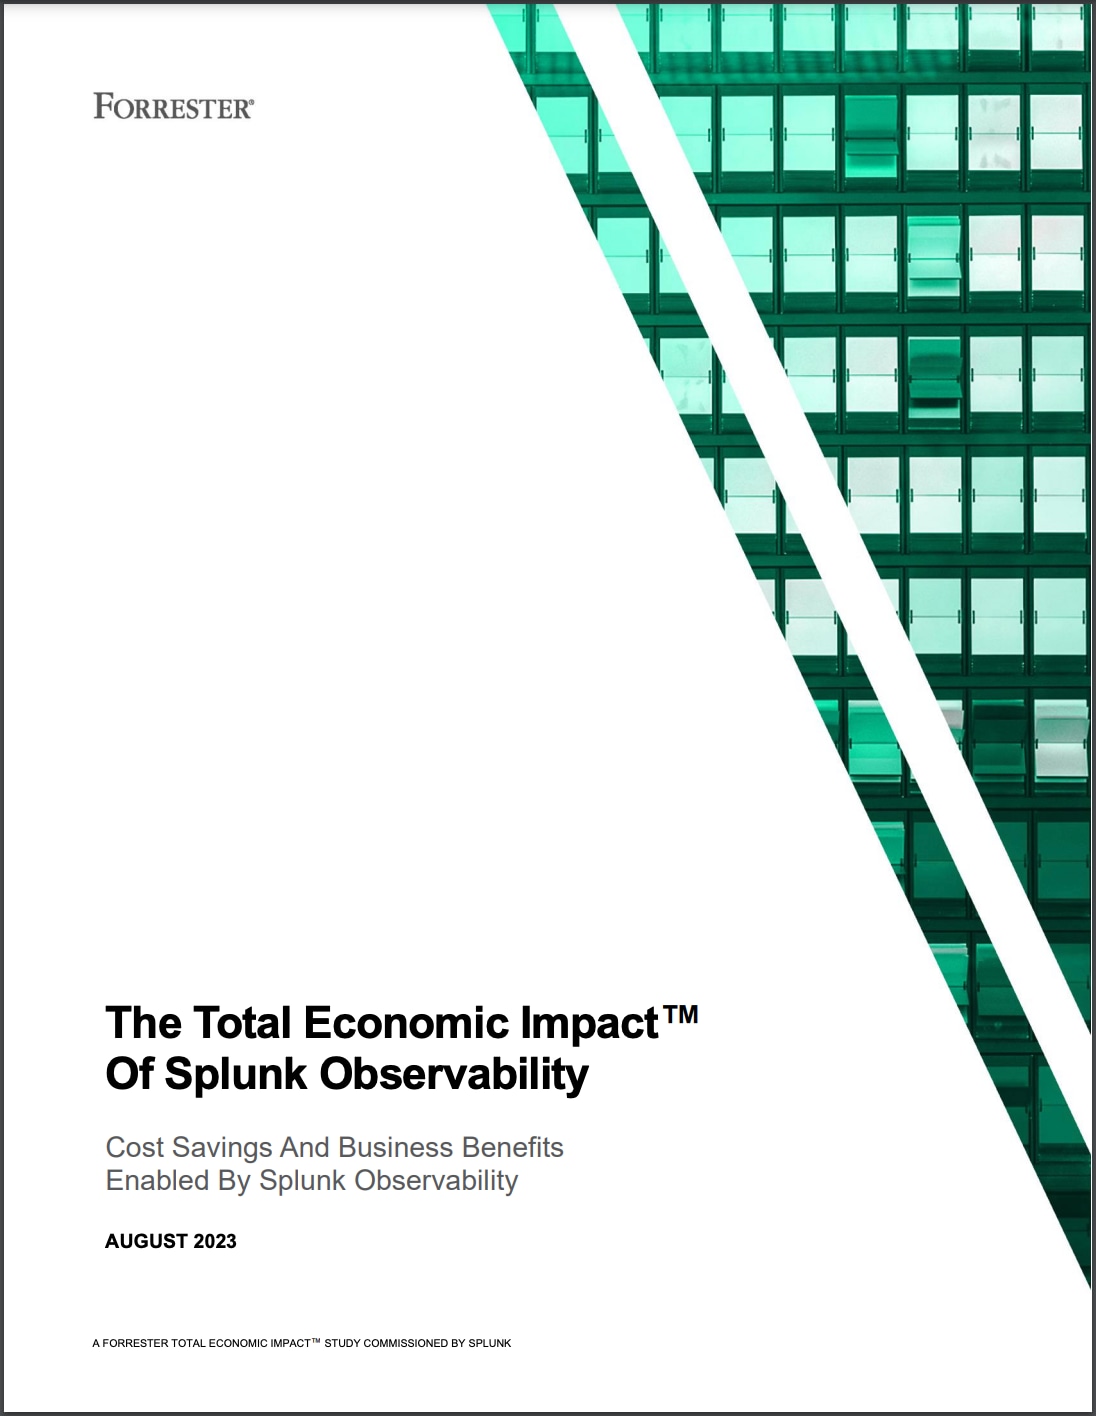 forrester-the-total-economic-impact-of-splunk-observability